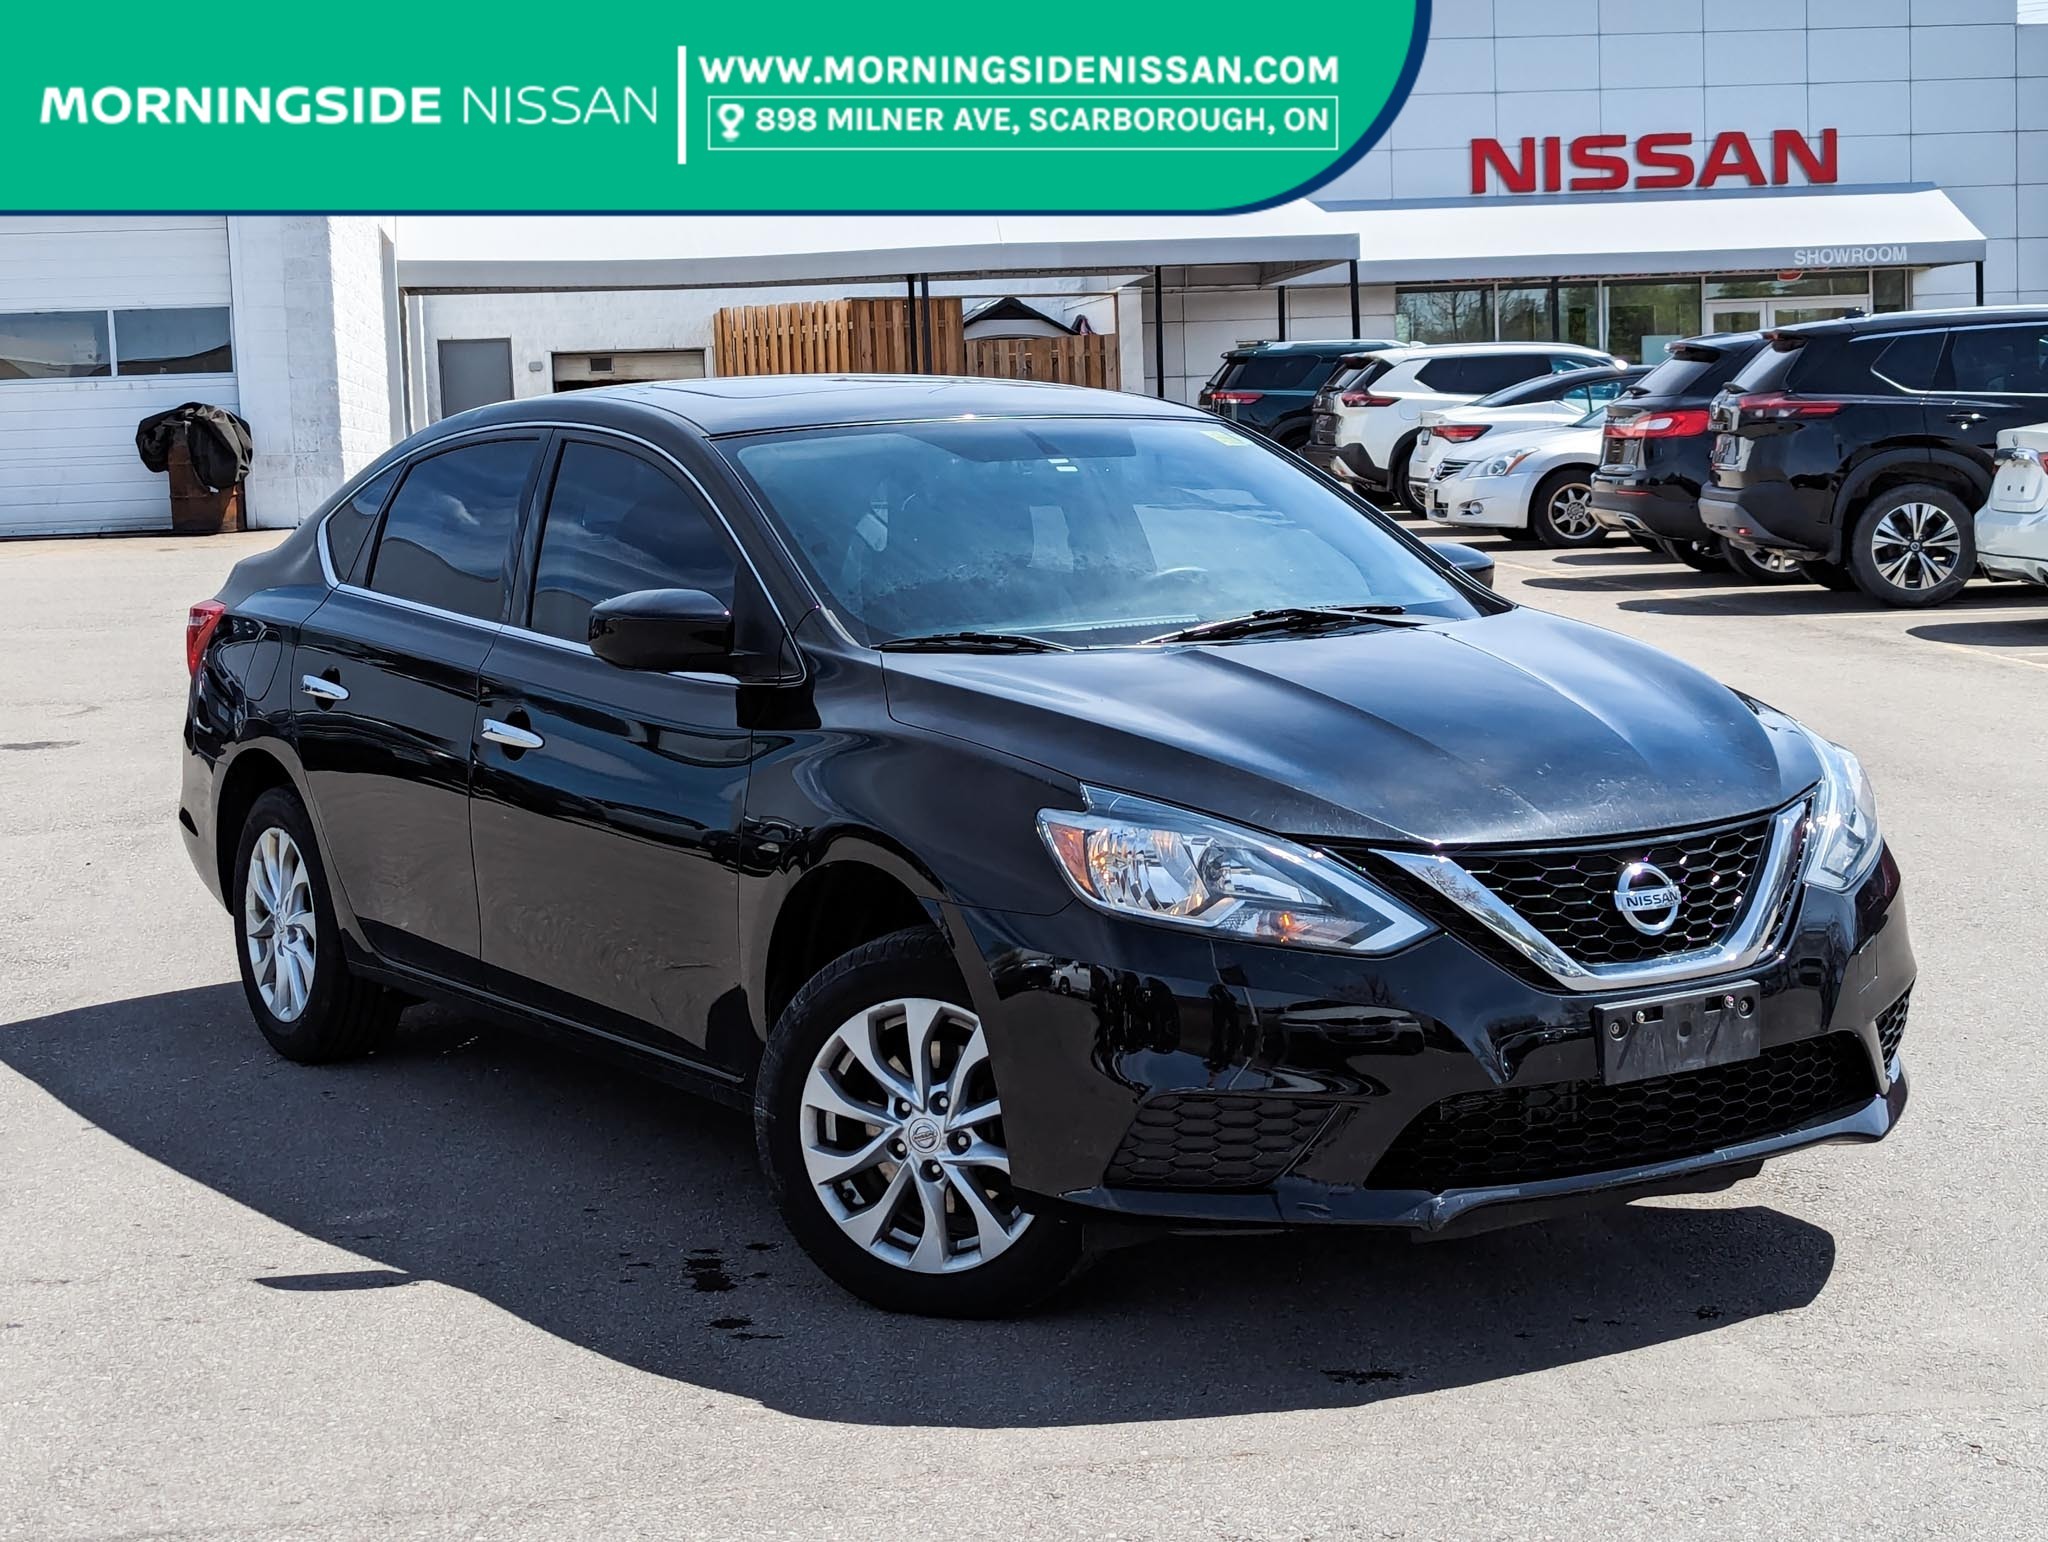 2017 Nissan Sentra SV STYLE PACKAGE|NO ACCIDENT